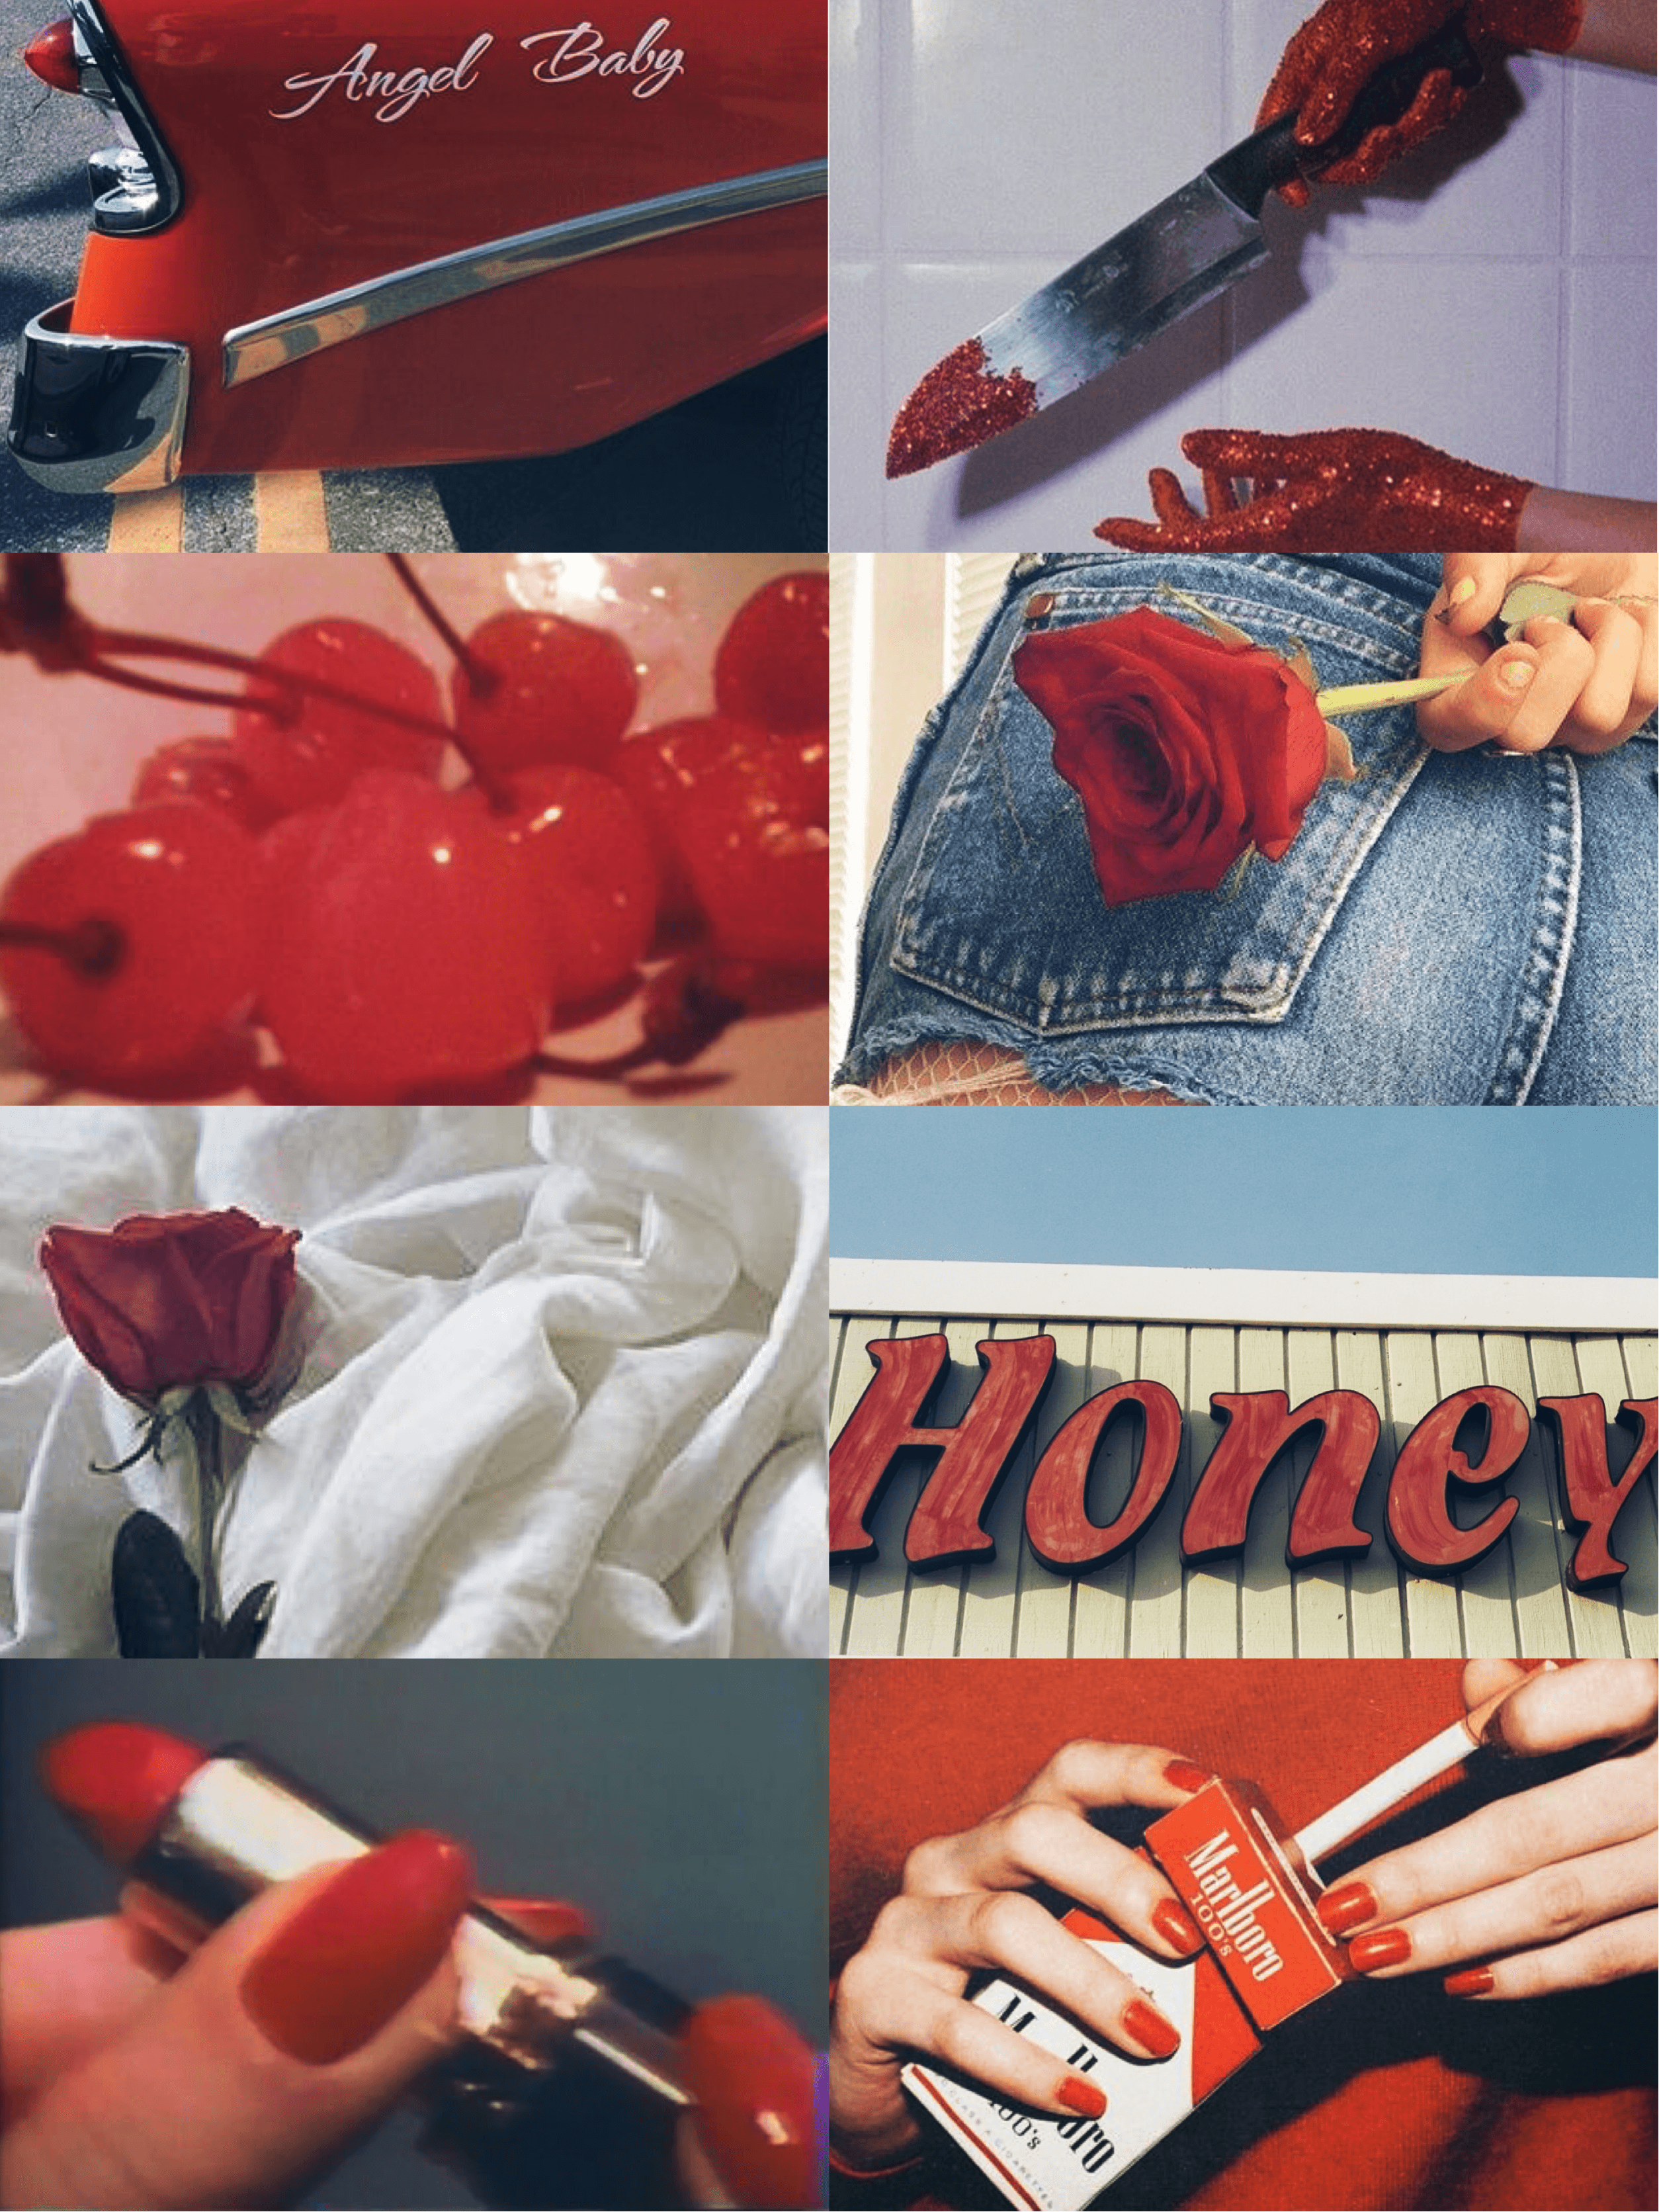 Red aesthetic collage with red rose, cherries, red lipstick, red car and red nail polish - IPhone red, vintage, nails